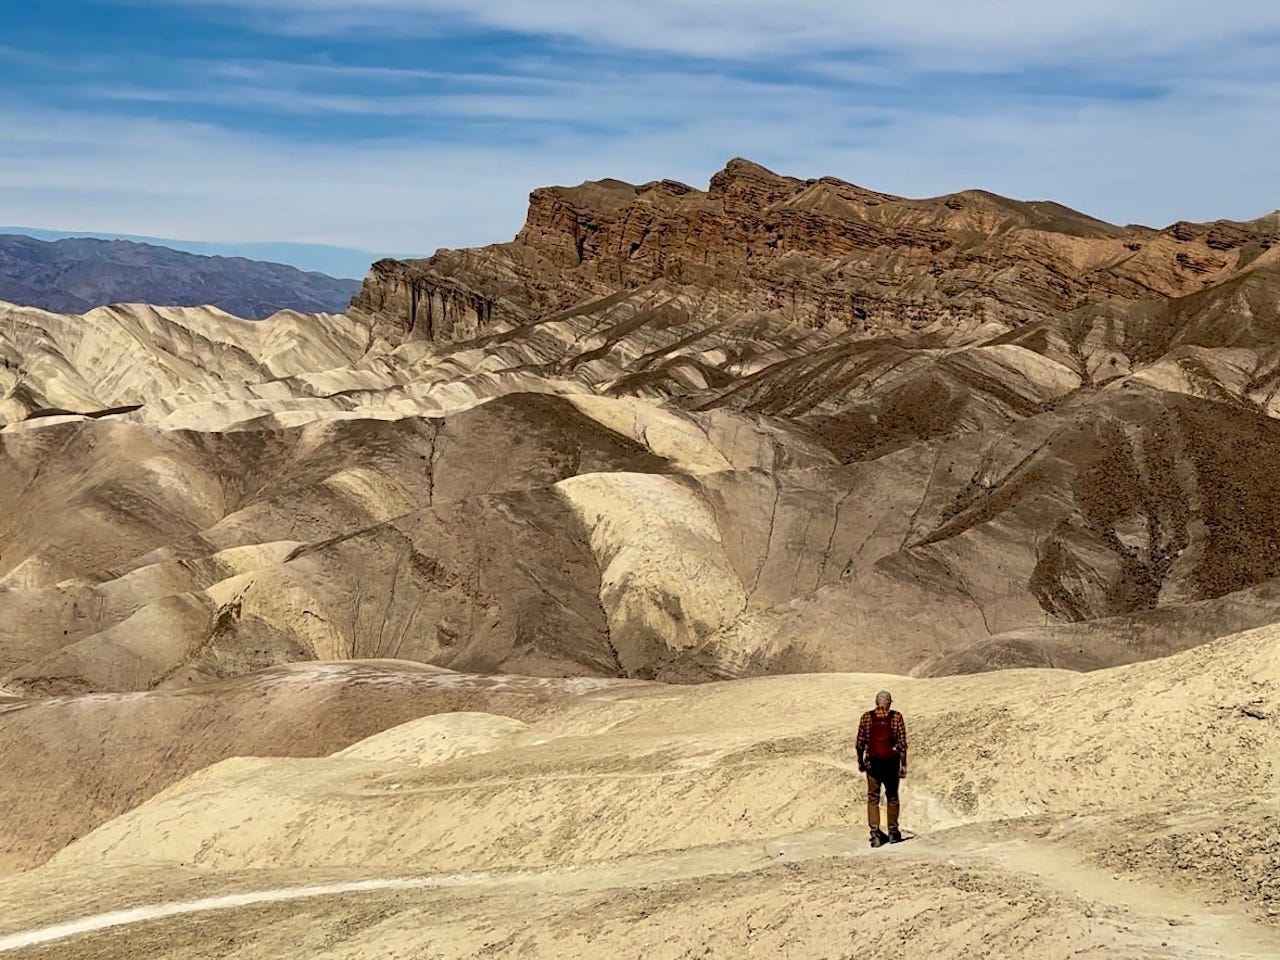 <p>If you're considering stopping by <a href="https://www.businessinsider.com/life-in-death-valley-one-of-hottest-places-on-earth-2020-8">Death Valley</a> this summer, the Smiths would highly encourage otherwise.</p><p>As much as they love the Californian desert park, hiking the Gower Gulch Loop, and soaking in the sunset views from the Mesquite Flat Sand Dunes, Matt and Karen said the sweltering heat conditions in the summer aren't worth the hassle.</p><p>"We love Death Valley," Matt said. "Don't go to Death Valley in the summer. It's not because Death Valley is a bad park. It's that the heat can kill you, literally."</p><p>He has a point. In early July 2023, tourists made headlines for arriving at the park in droves despite the NPS issuing multiple warnings of <a href="https://www.businessinsider.com/tourists-visit-death-valley-during-dangerous-heatwave-2023-7">a dangerous heat wave</a> reaching temperatures of 130 degrees Fahrenheit. <a href="https://www.businessinsider.com/man-dead-death-valley-heat-illness-broken-car-2023-7">Several deaths</a> were reported in the aftermath, including that of <a href="https://www.businessinsider.com/elderly-hiker-died-in-californias-death-valley-after-heatwave-warning-2023-7">an older hiker</a>, who the NPS reported was discovered collapsed by a restroom near the Golden Canyon trailhead.</p><p>For a safer, less brutally hot visit, the Smiths recommend planning a trip in January or February.</p>